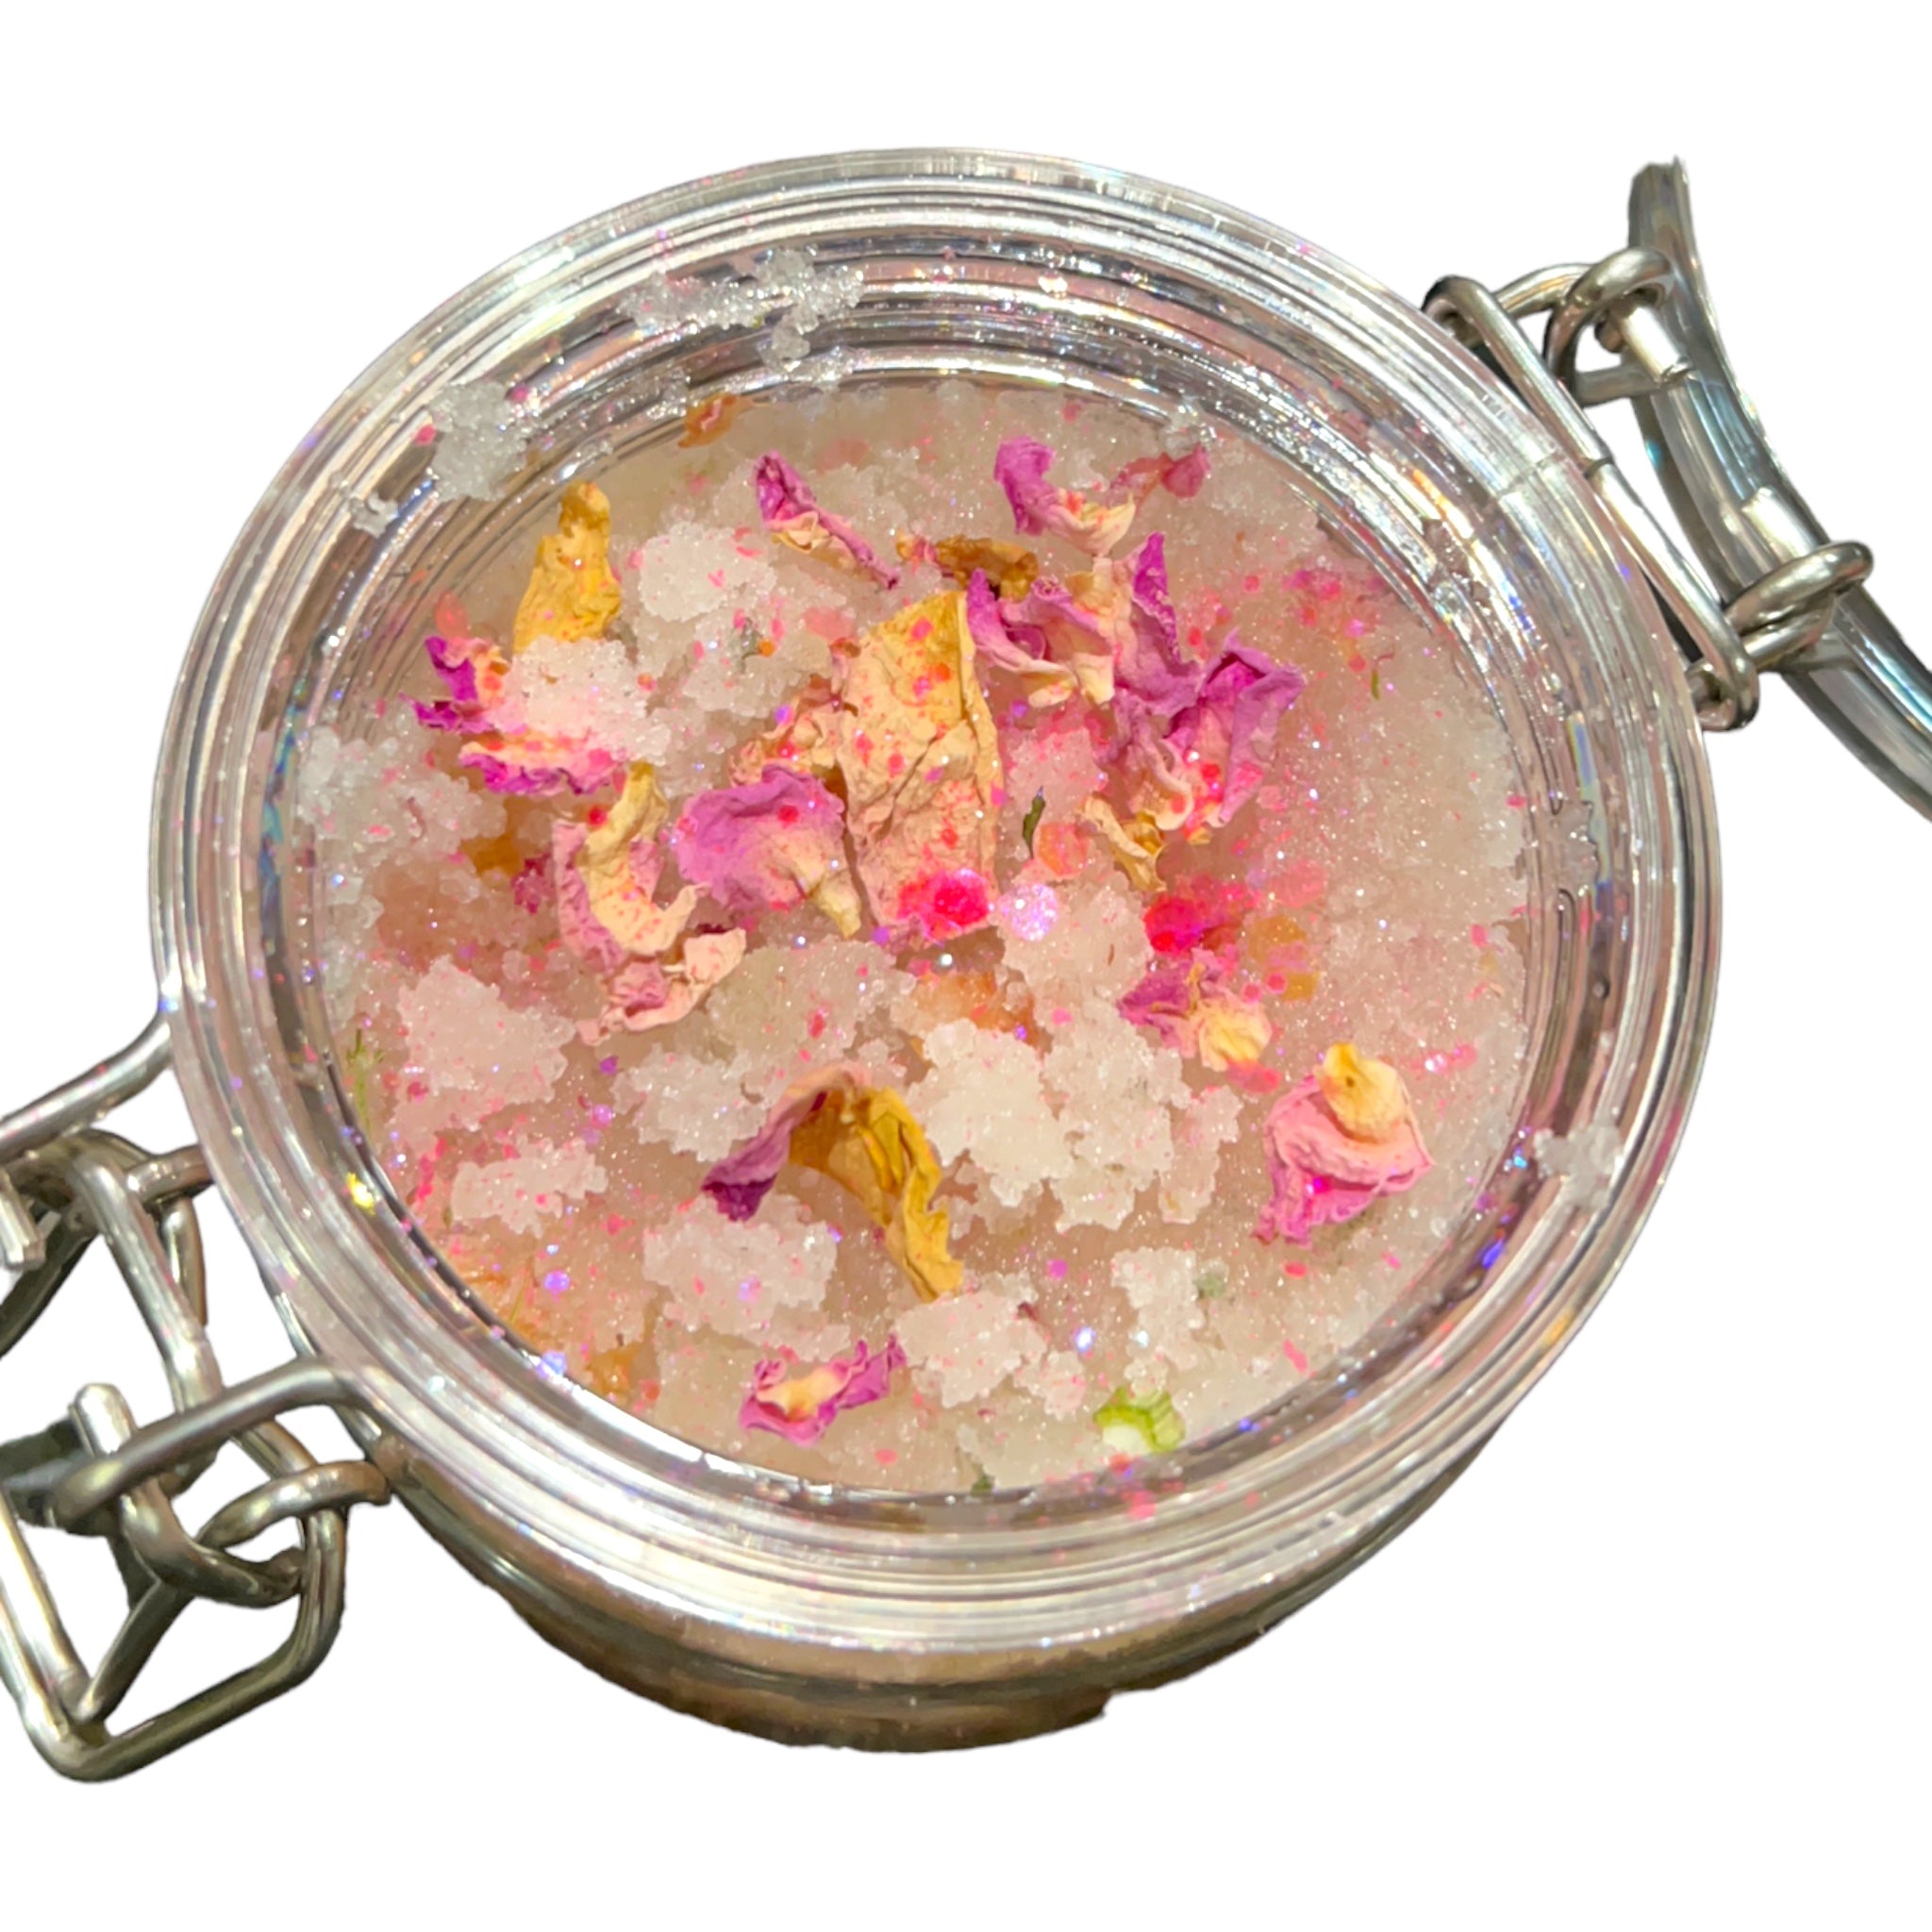 Come To Me Body Sugar Scrub - Attraction Spell Infuse Your Aura